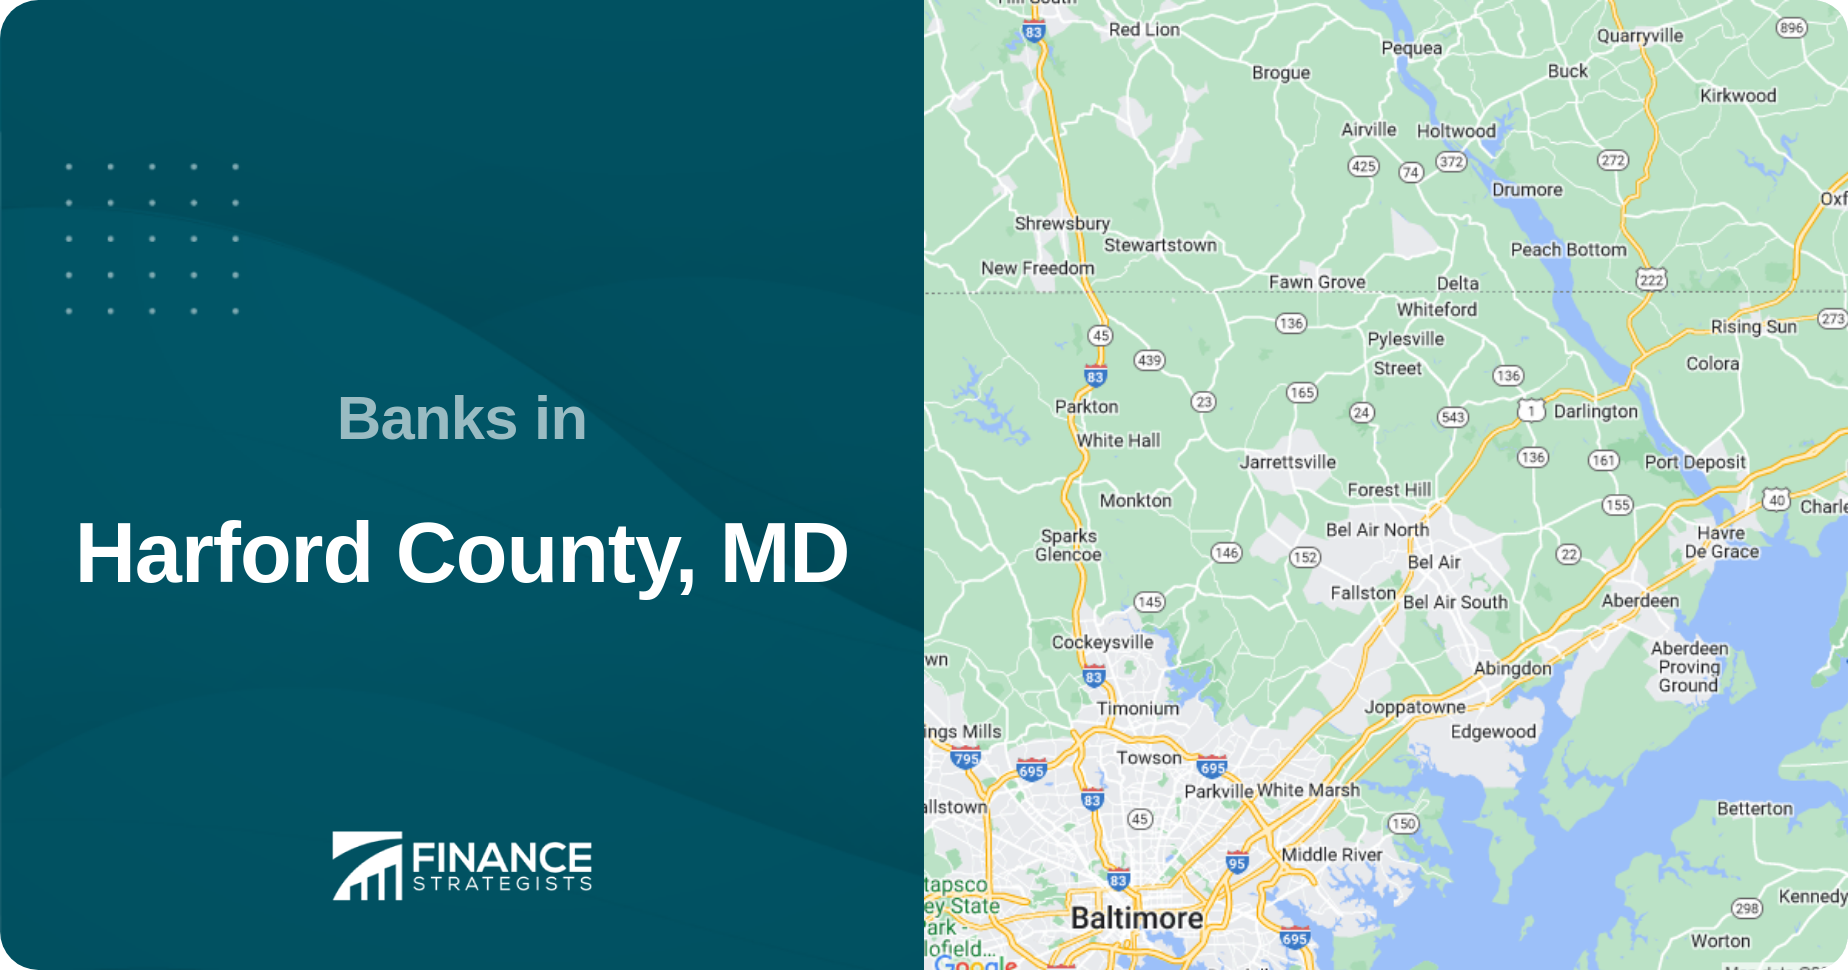 Banks in Harford County, MD